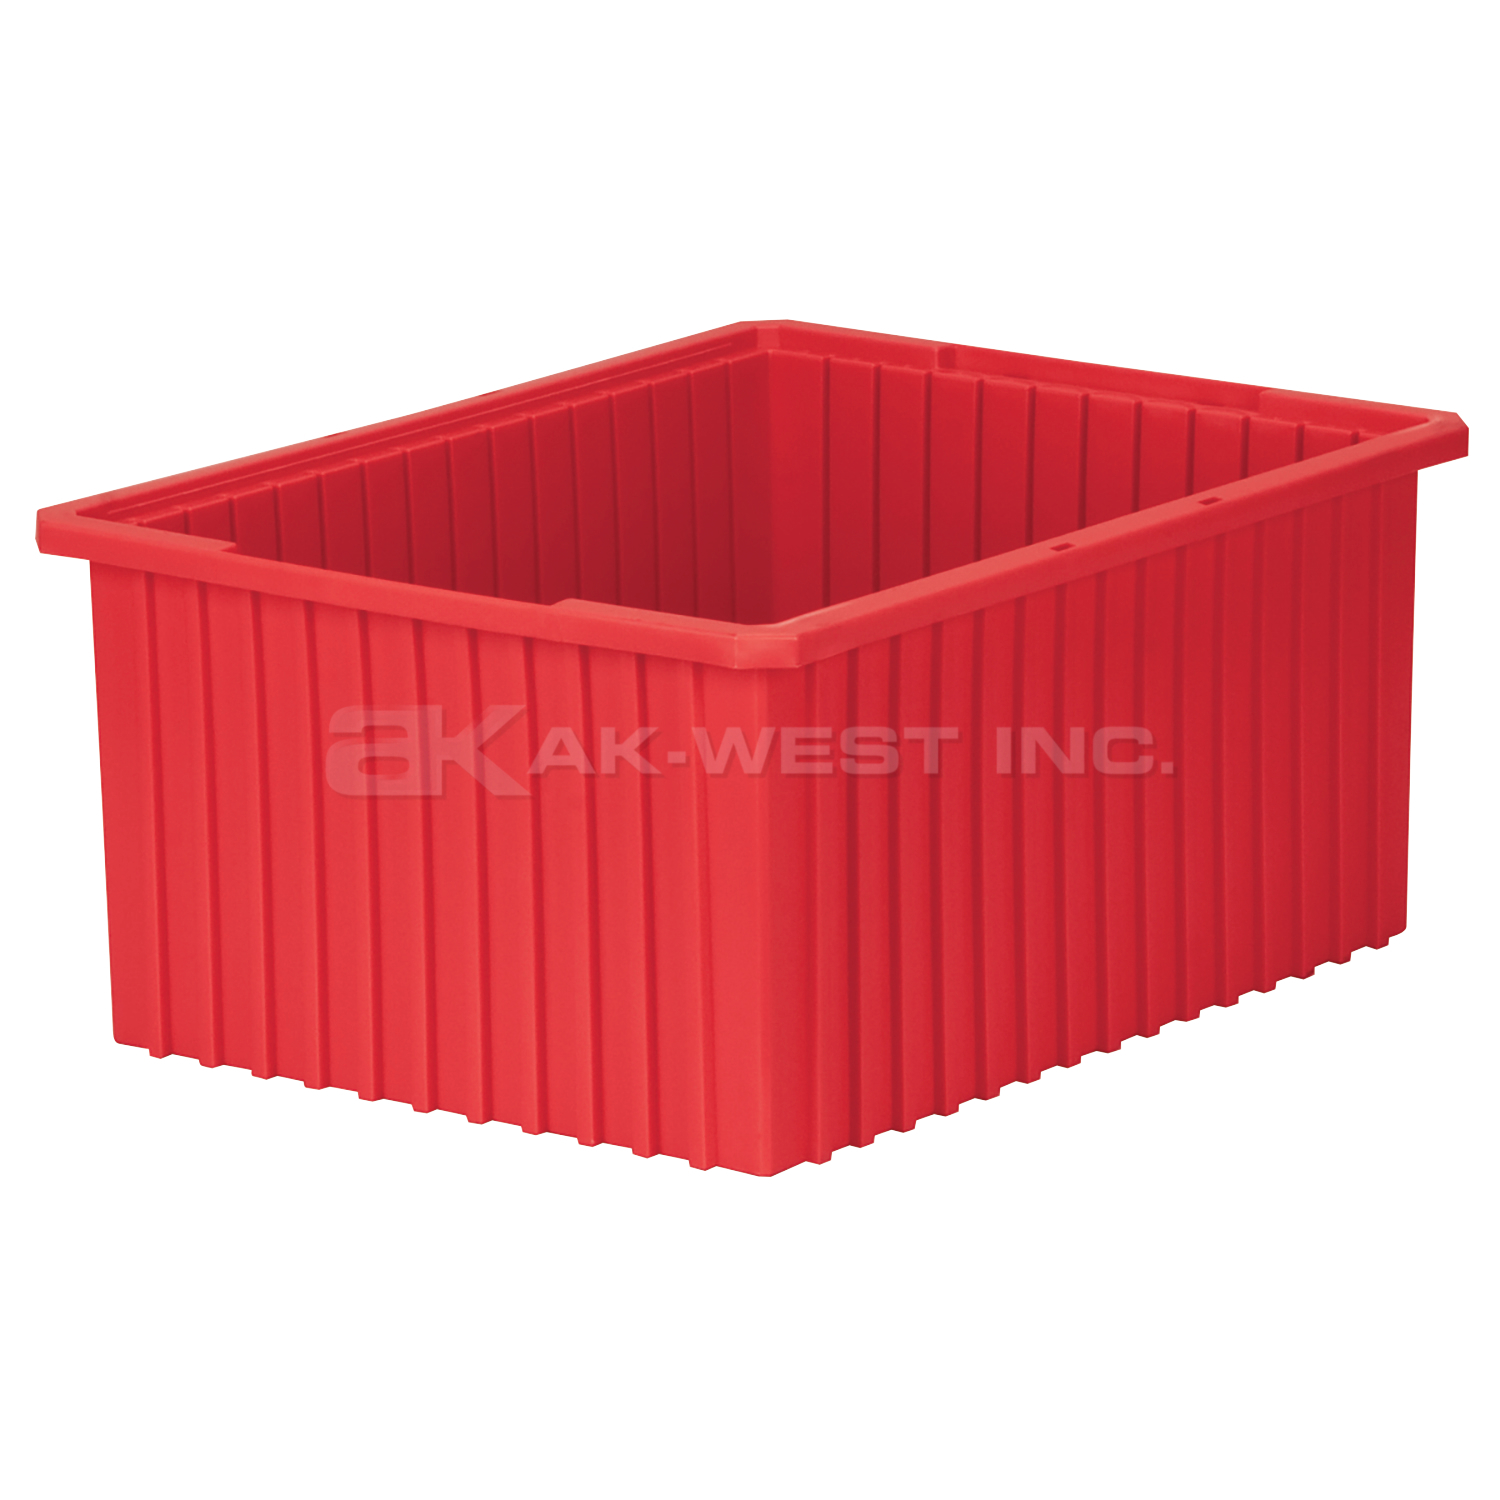 Red, 22-3/8" x 17-3/8" x 10" Dividable Grid Container (2 Per Carton)